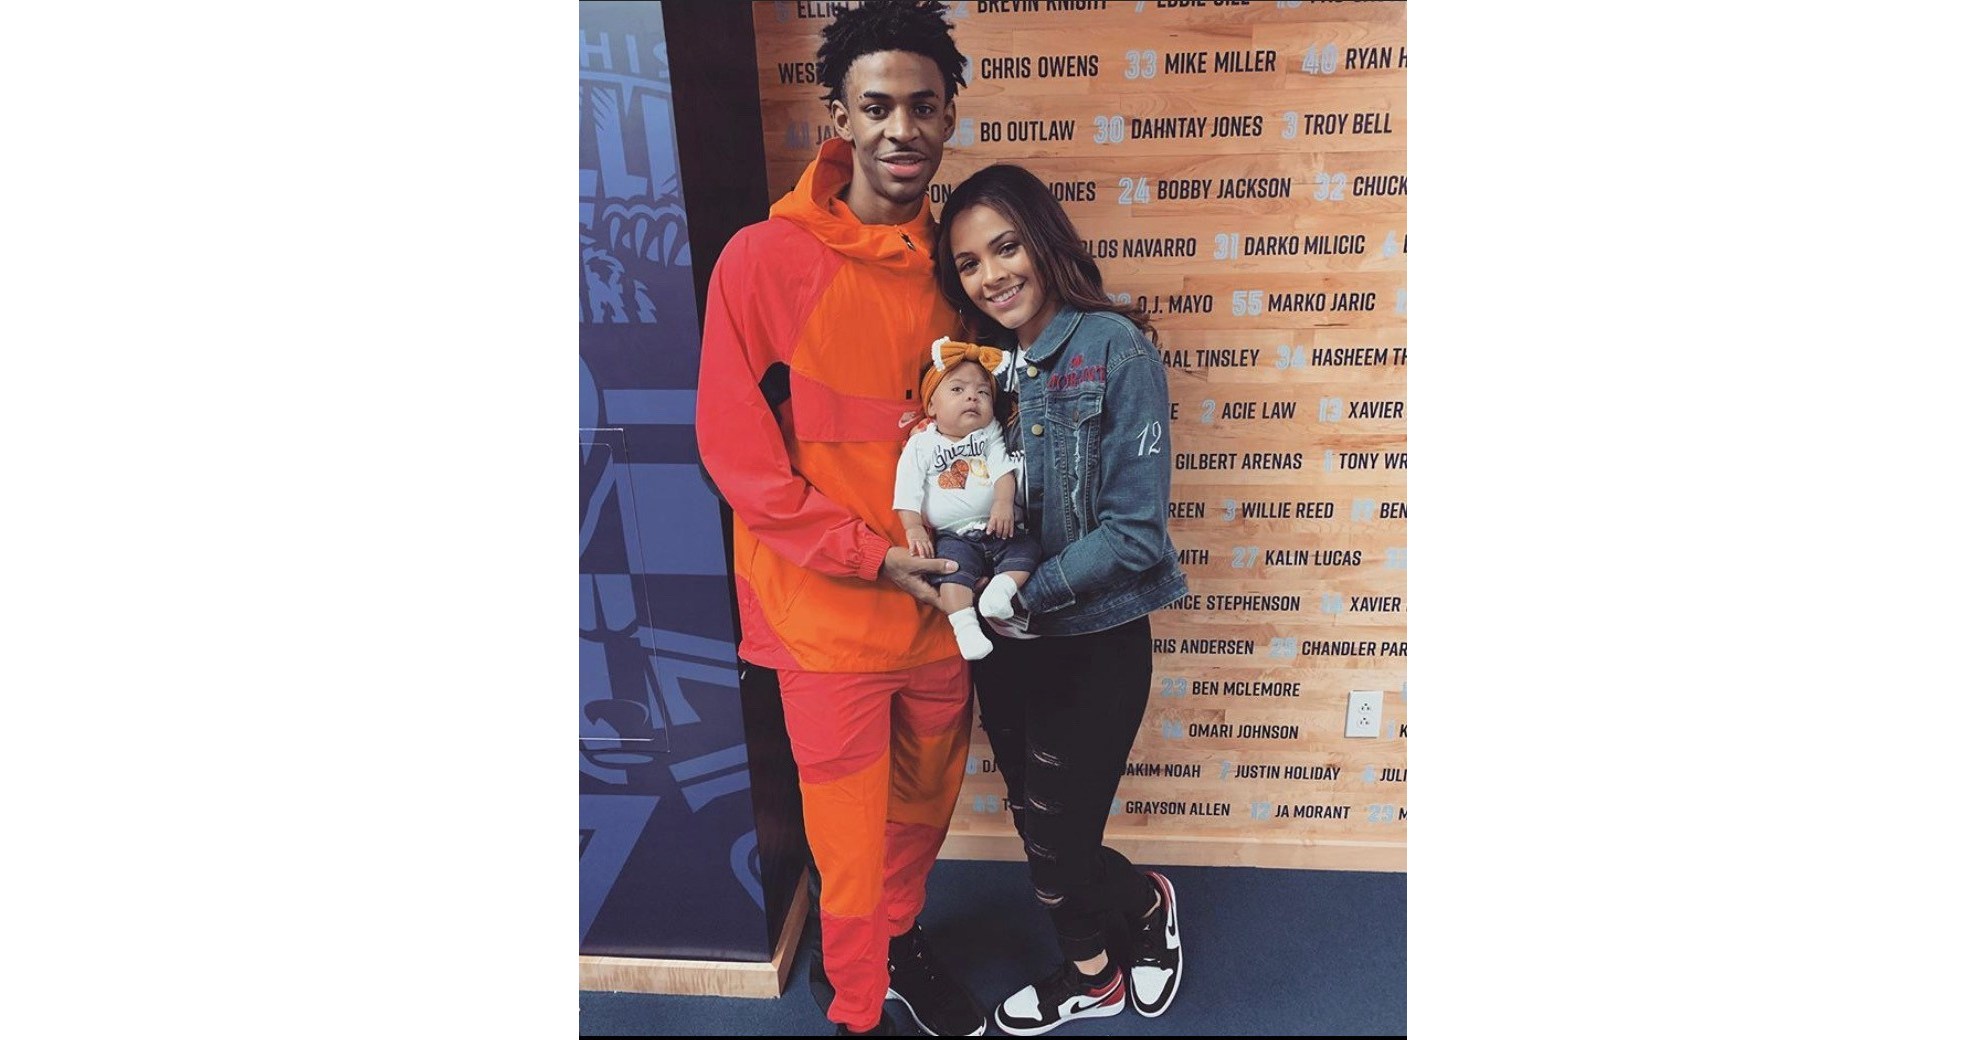 Nba Star Ja Morant And Kk Dixon Serve As National Promise Walk Co Chairs For The Preeclampsia Foundation Revealing Their Harrowing Birth Story